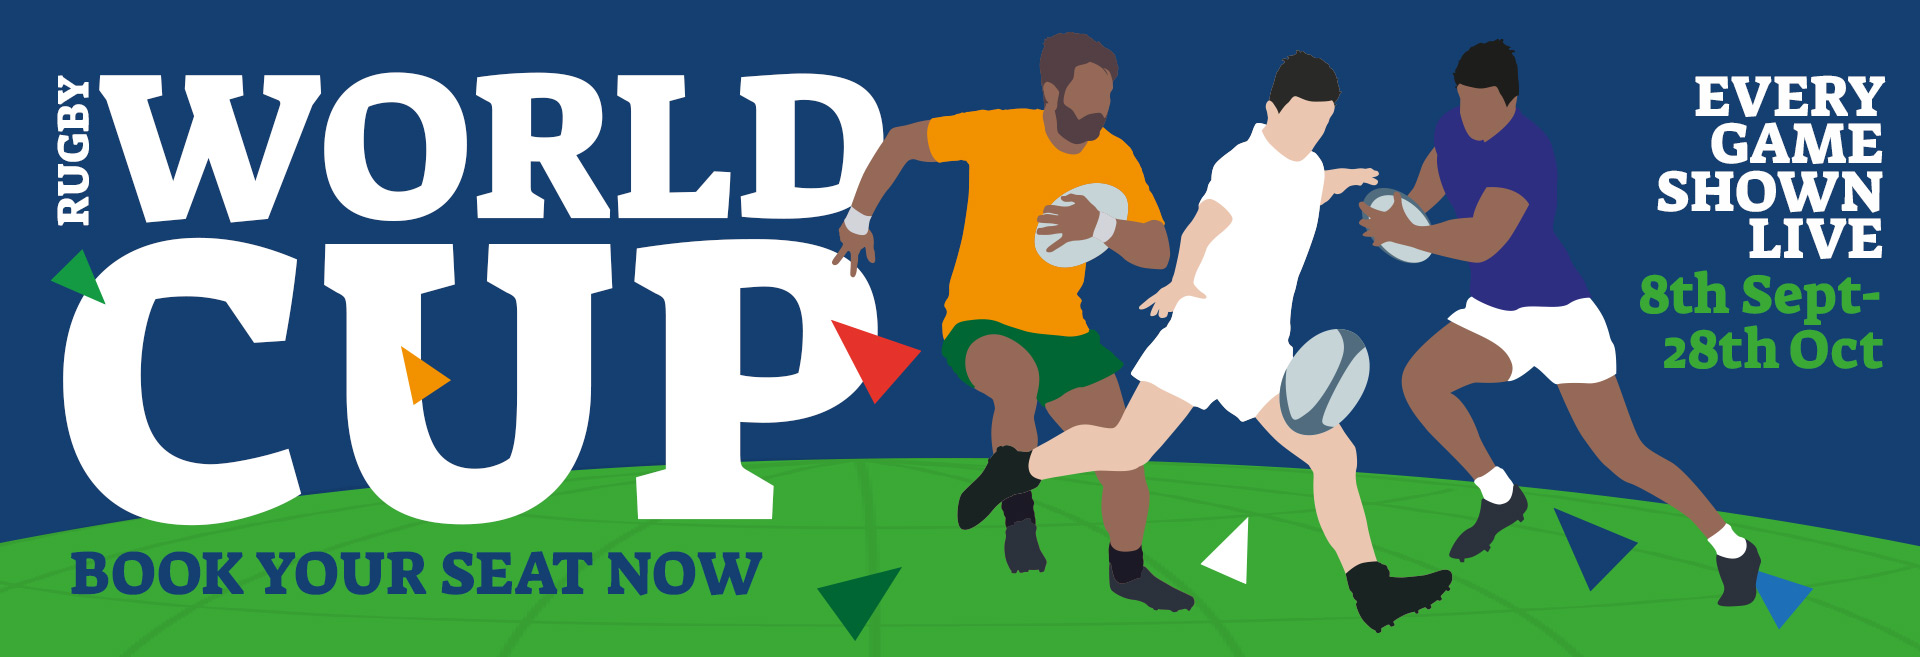 Watch the Rugby World Cup at The Bull